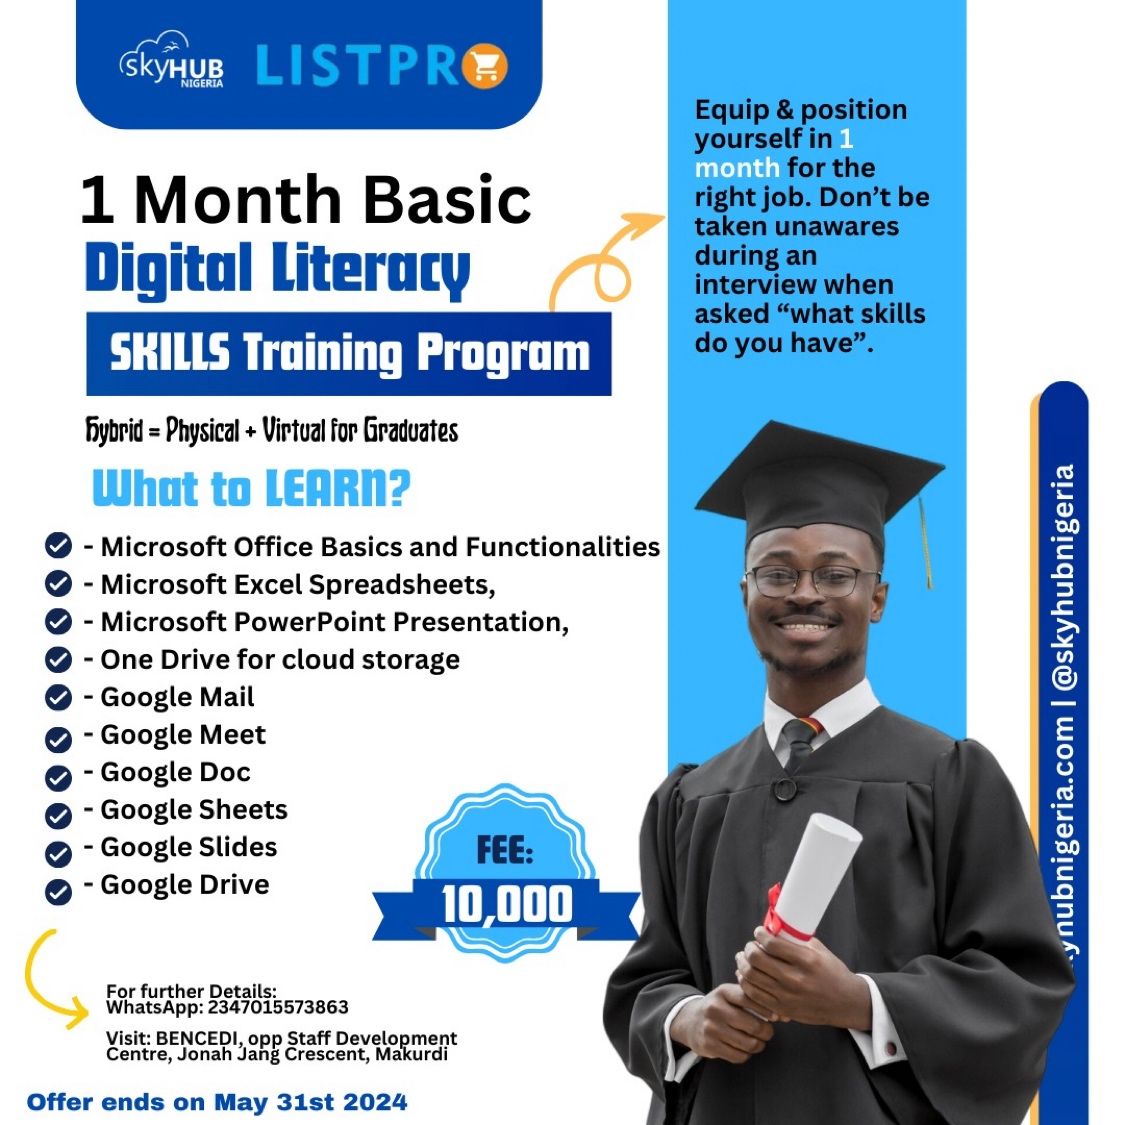 Listpro in collaboration with @SKYHUBNIGERIA is organizing a hybrid training program to teach these following basic digital literacy skills.

You’ll be learning all of this in one month in an intensive hybrid (virtual + physical) training for only N10,000.
#skyhubnigeria #listpro